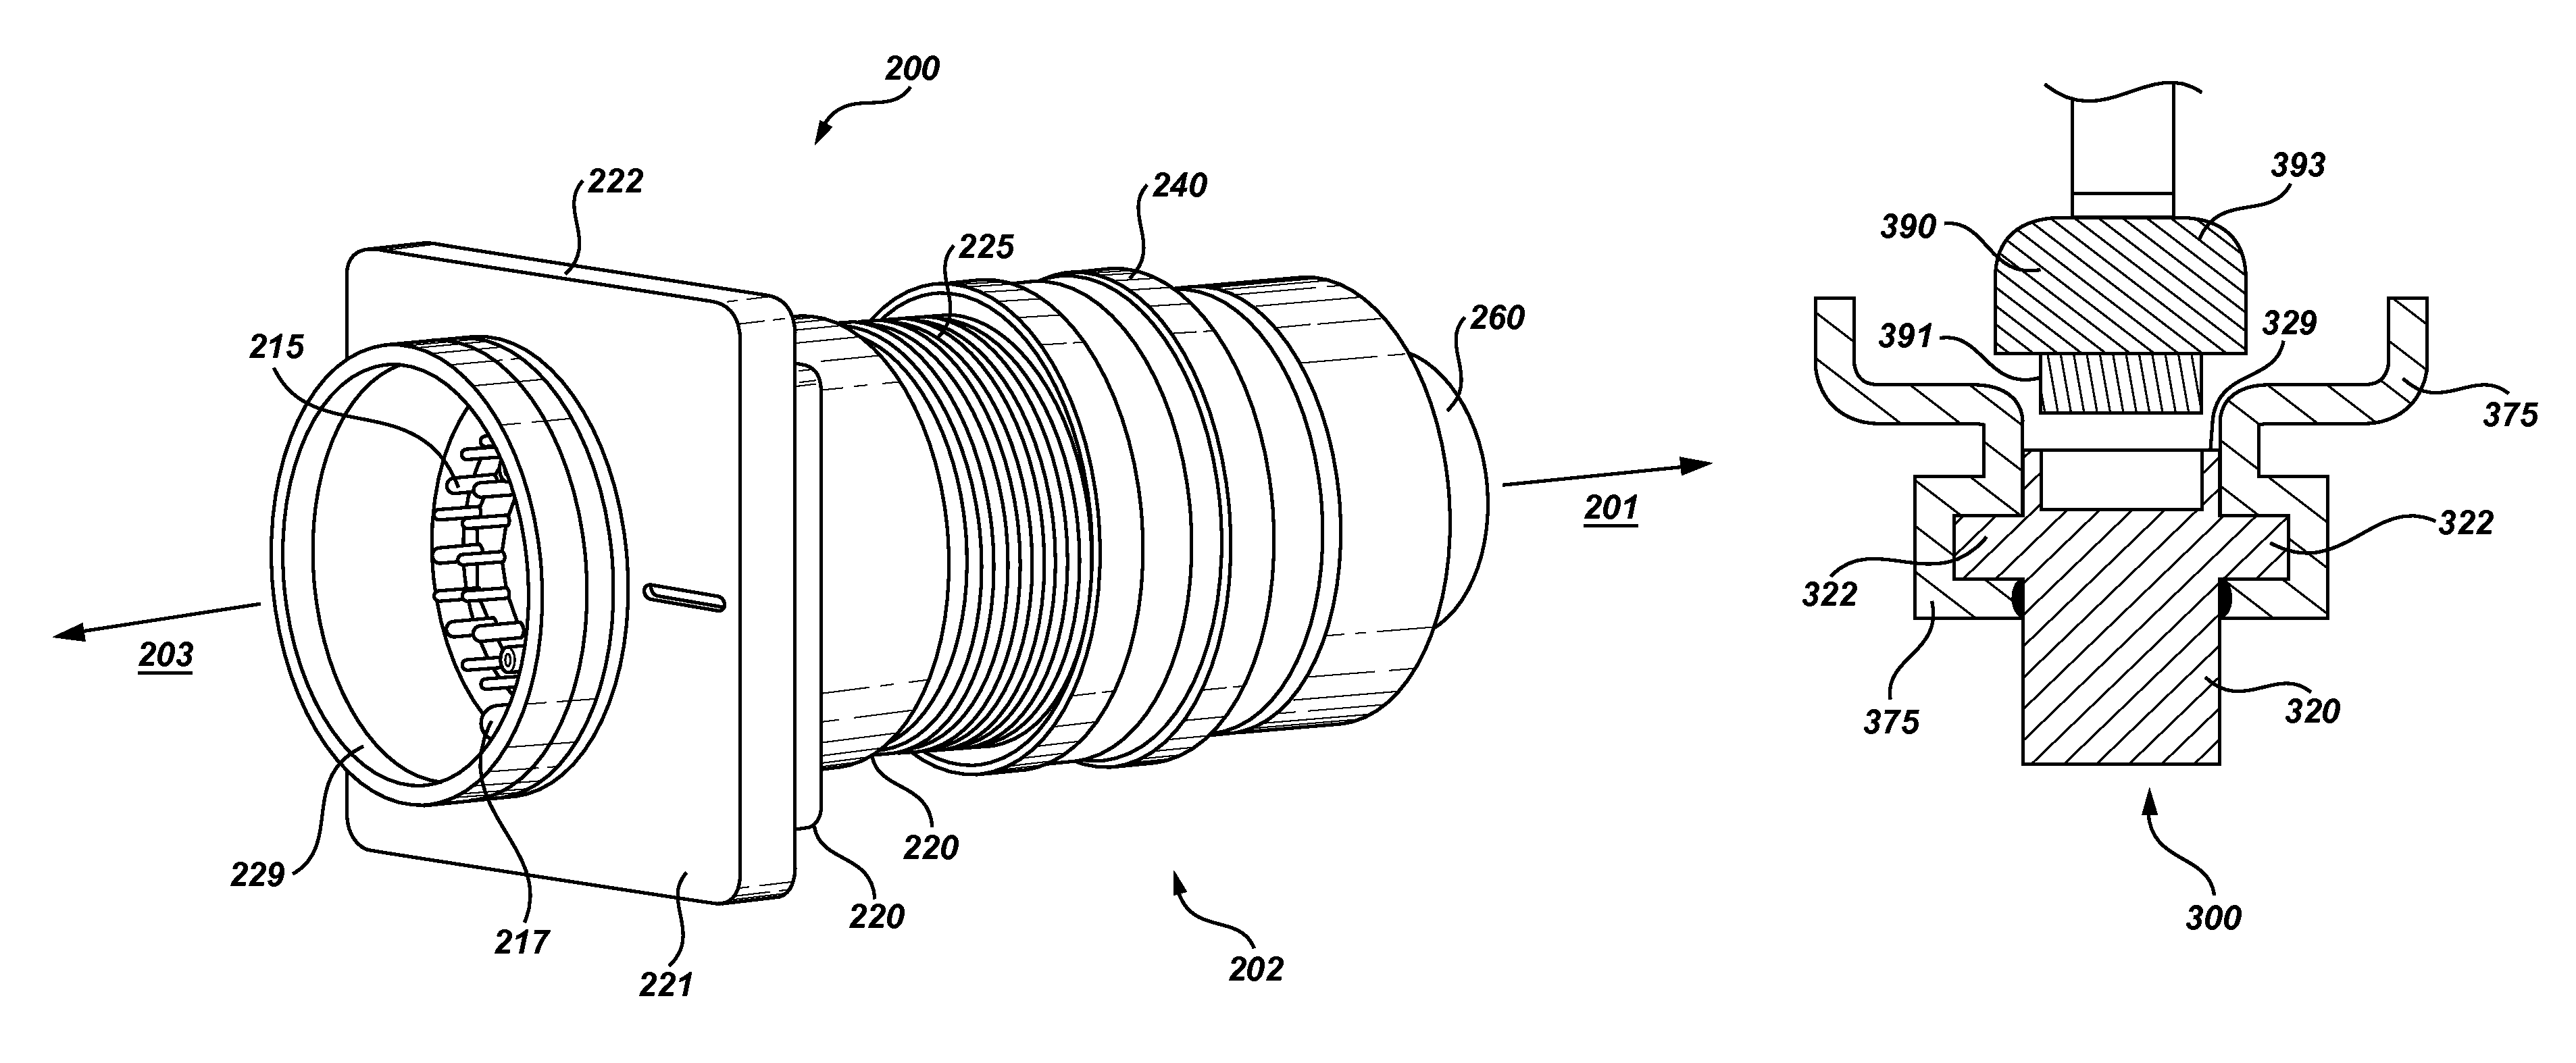 Electrical connector for missile launch rail